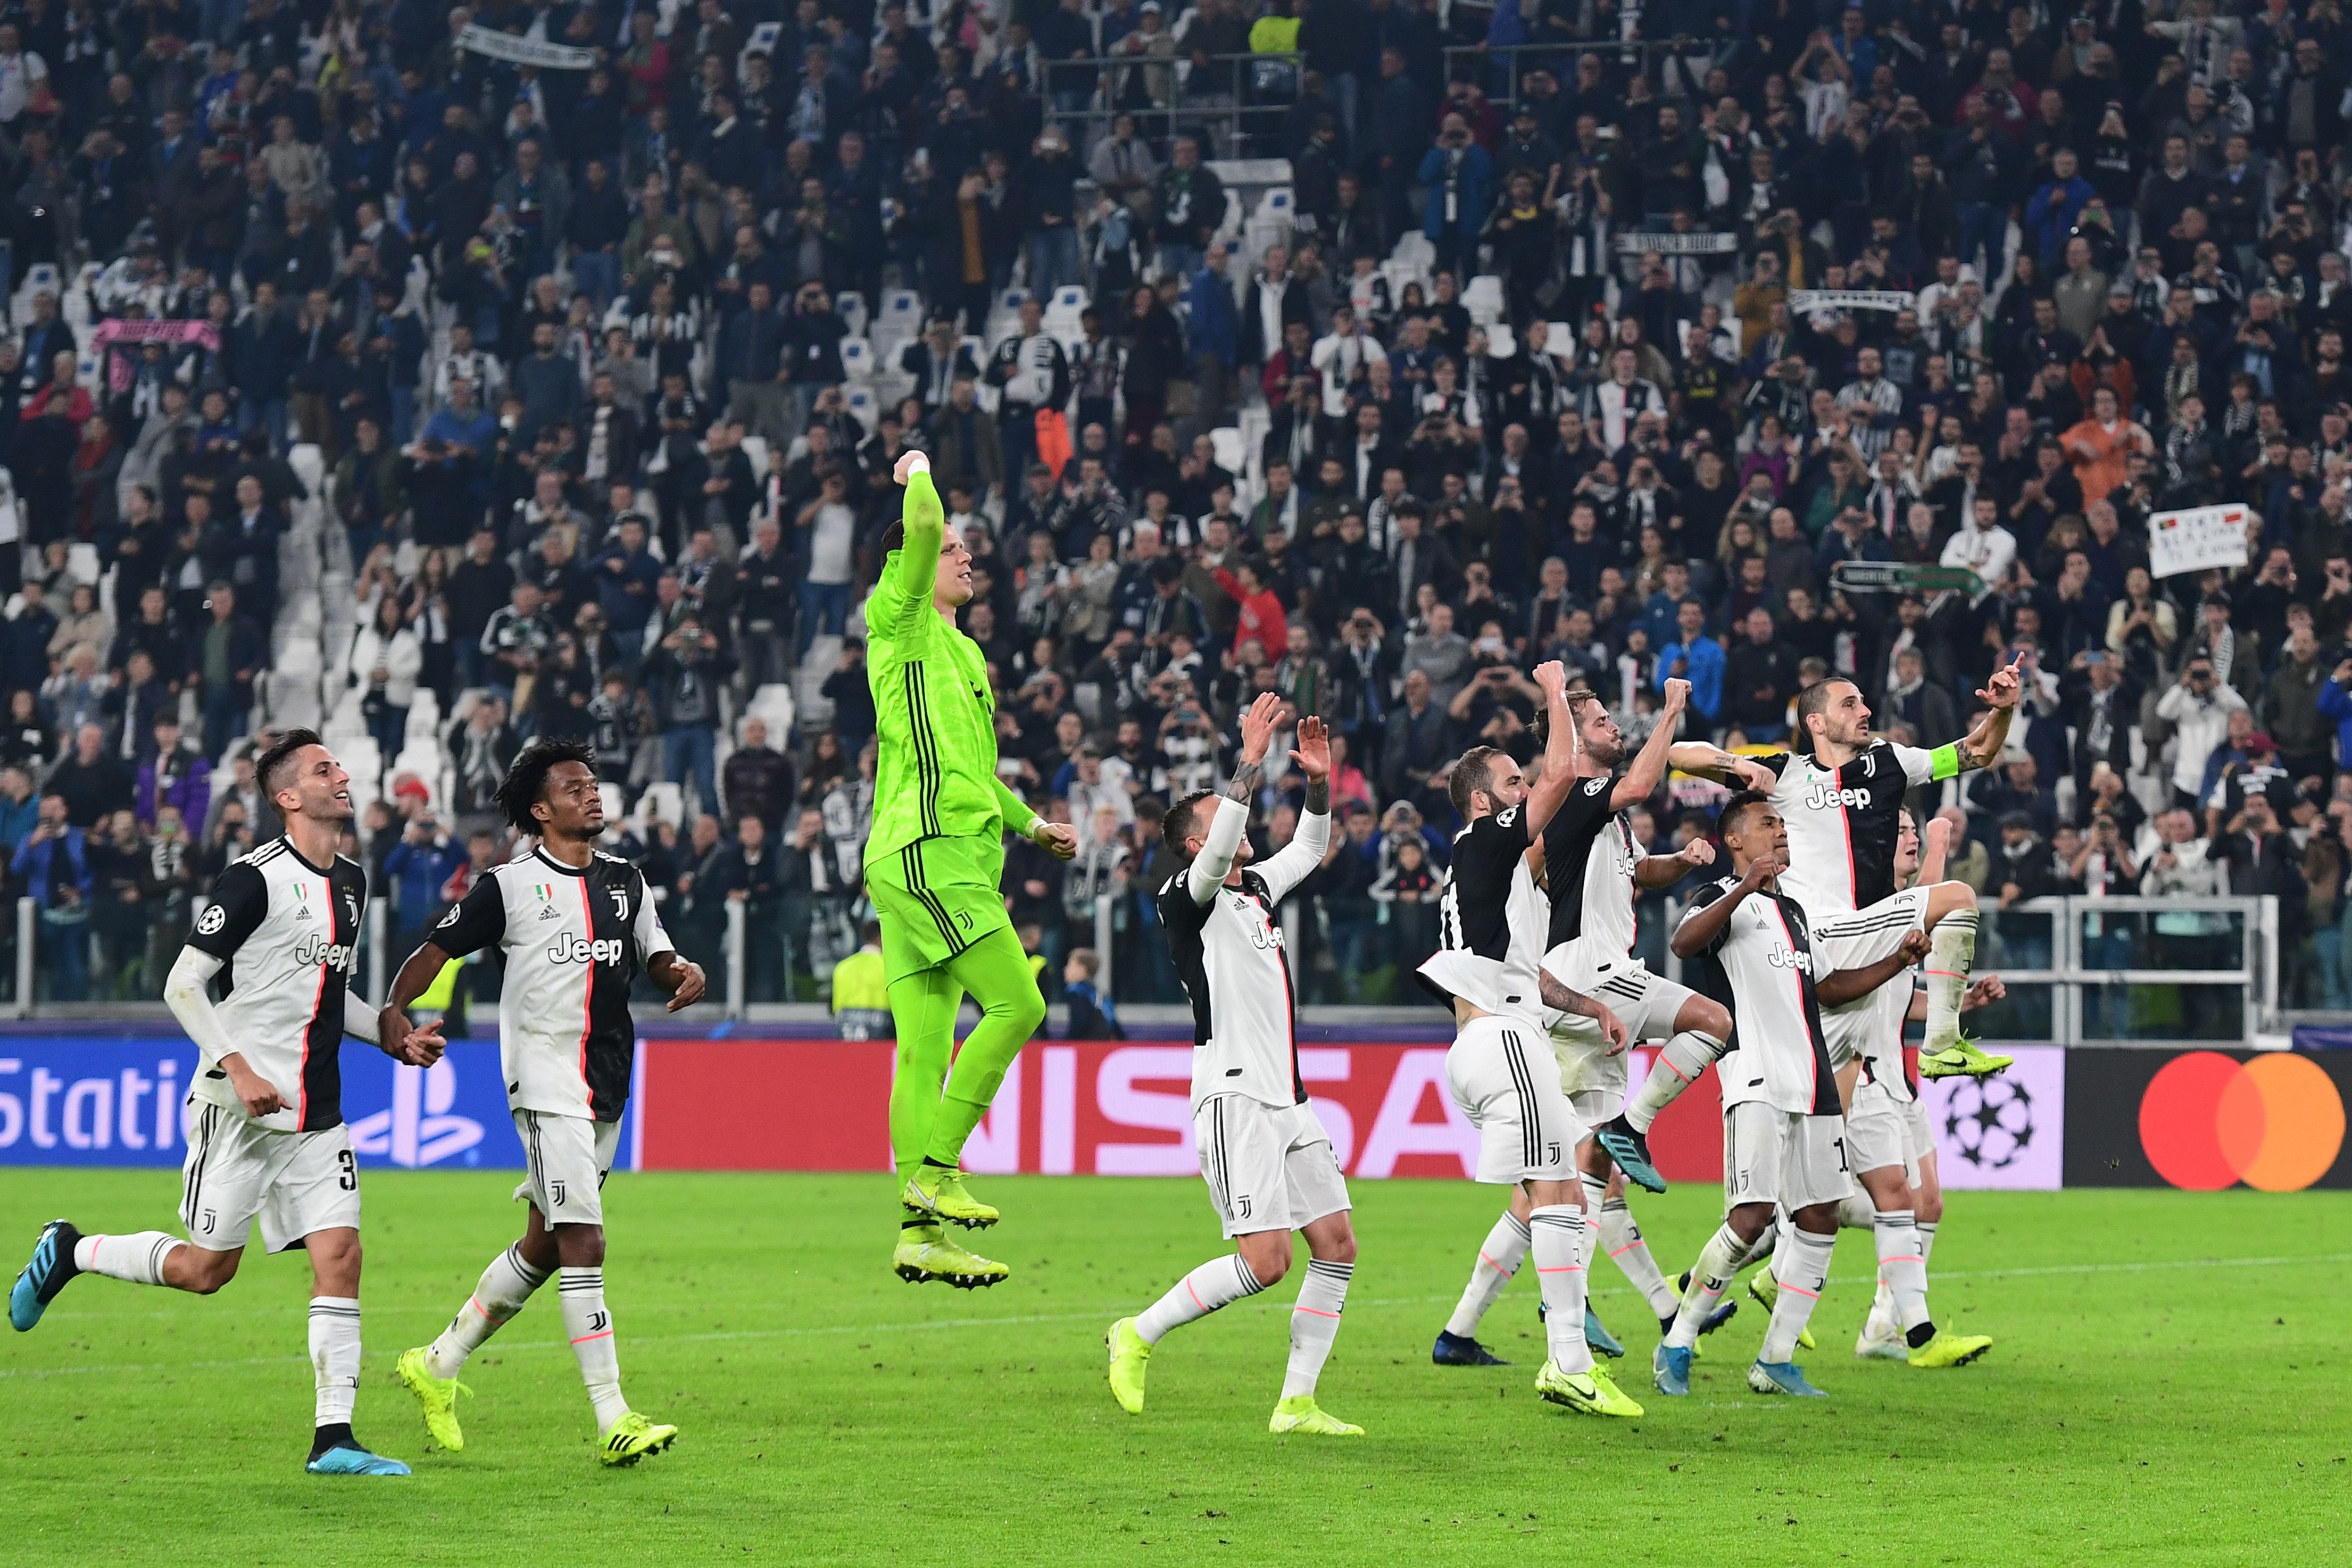 Juventus players acknowledge the public at the end of the UEFA Champions League Group D football match Juventus vs Lokomotiv Moscow on October 22, 2019 at the Juventus stadium in Turin. (Photo by Miguel MEDINA / AFP) (Photo by MIGUEL MEDINA/AFP via Getty Images)